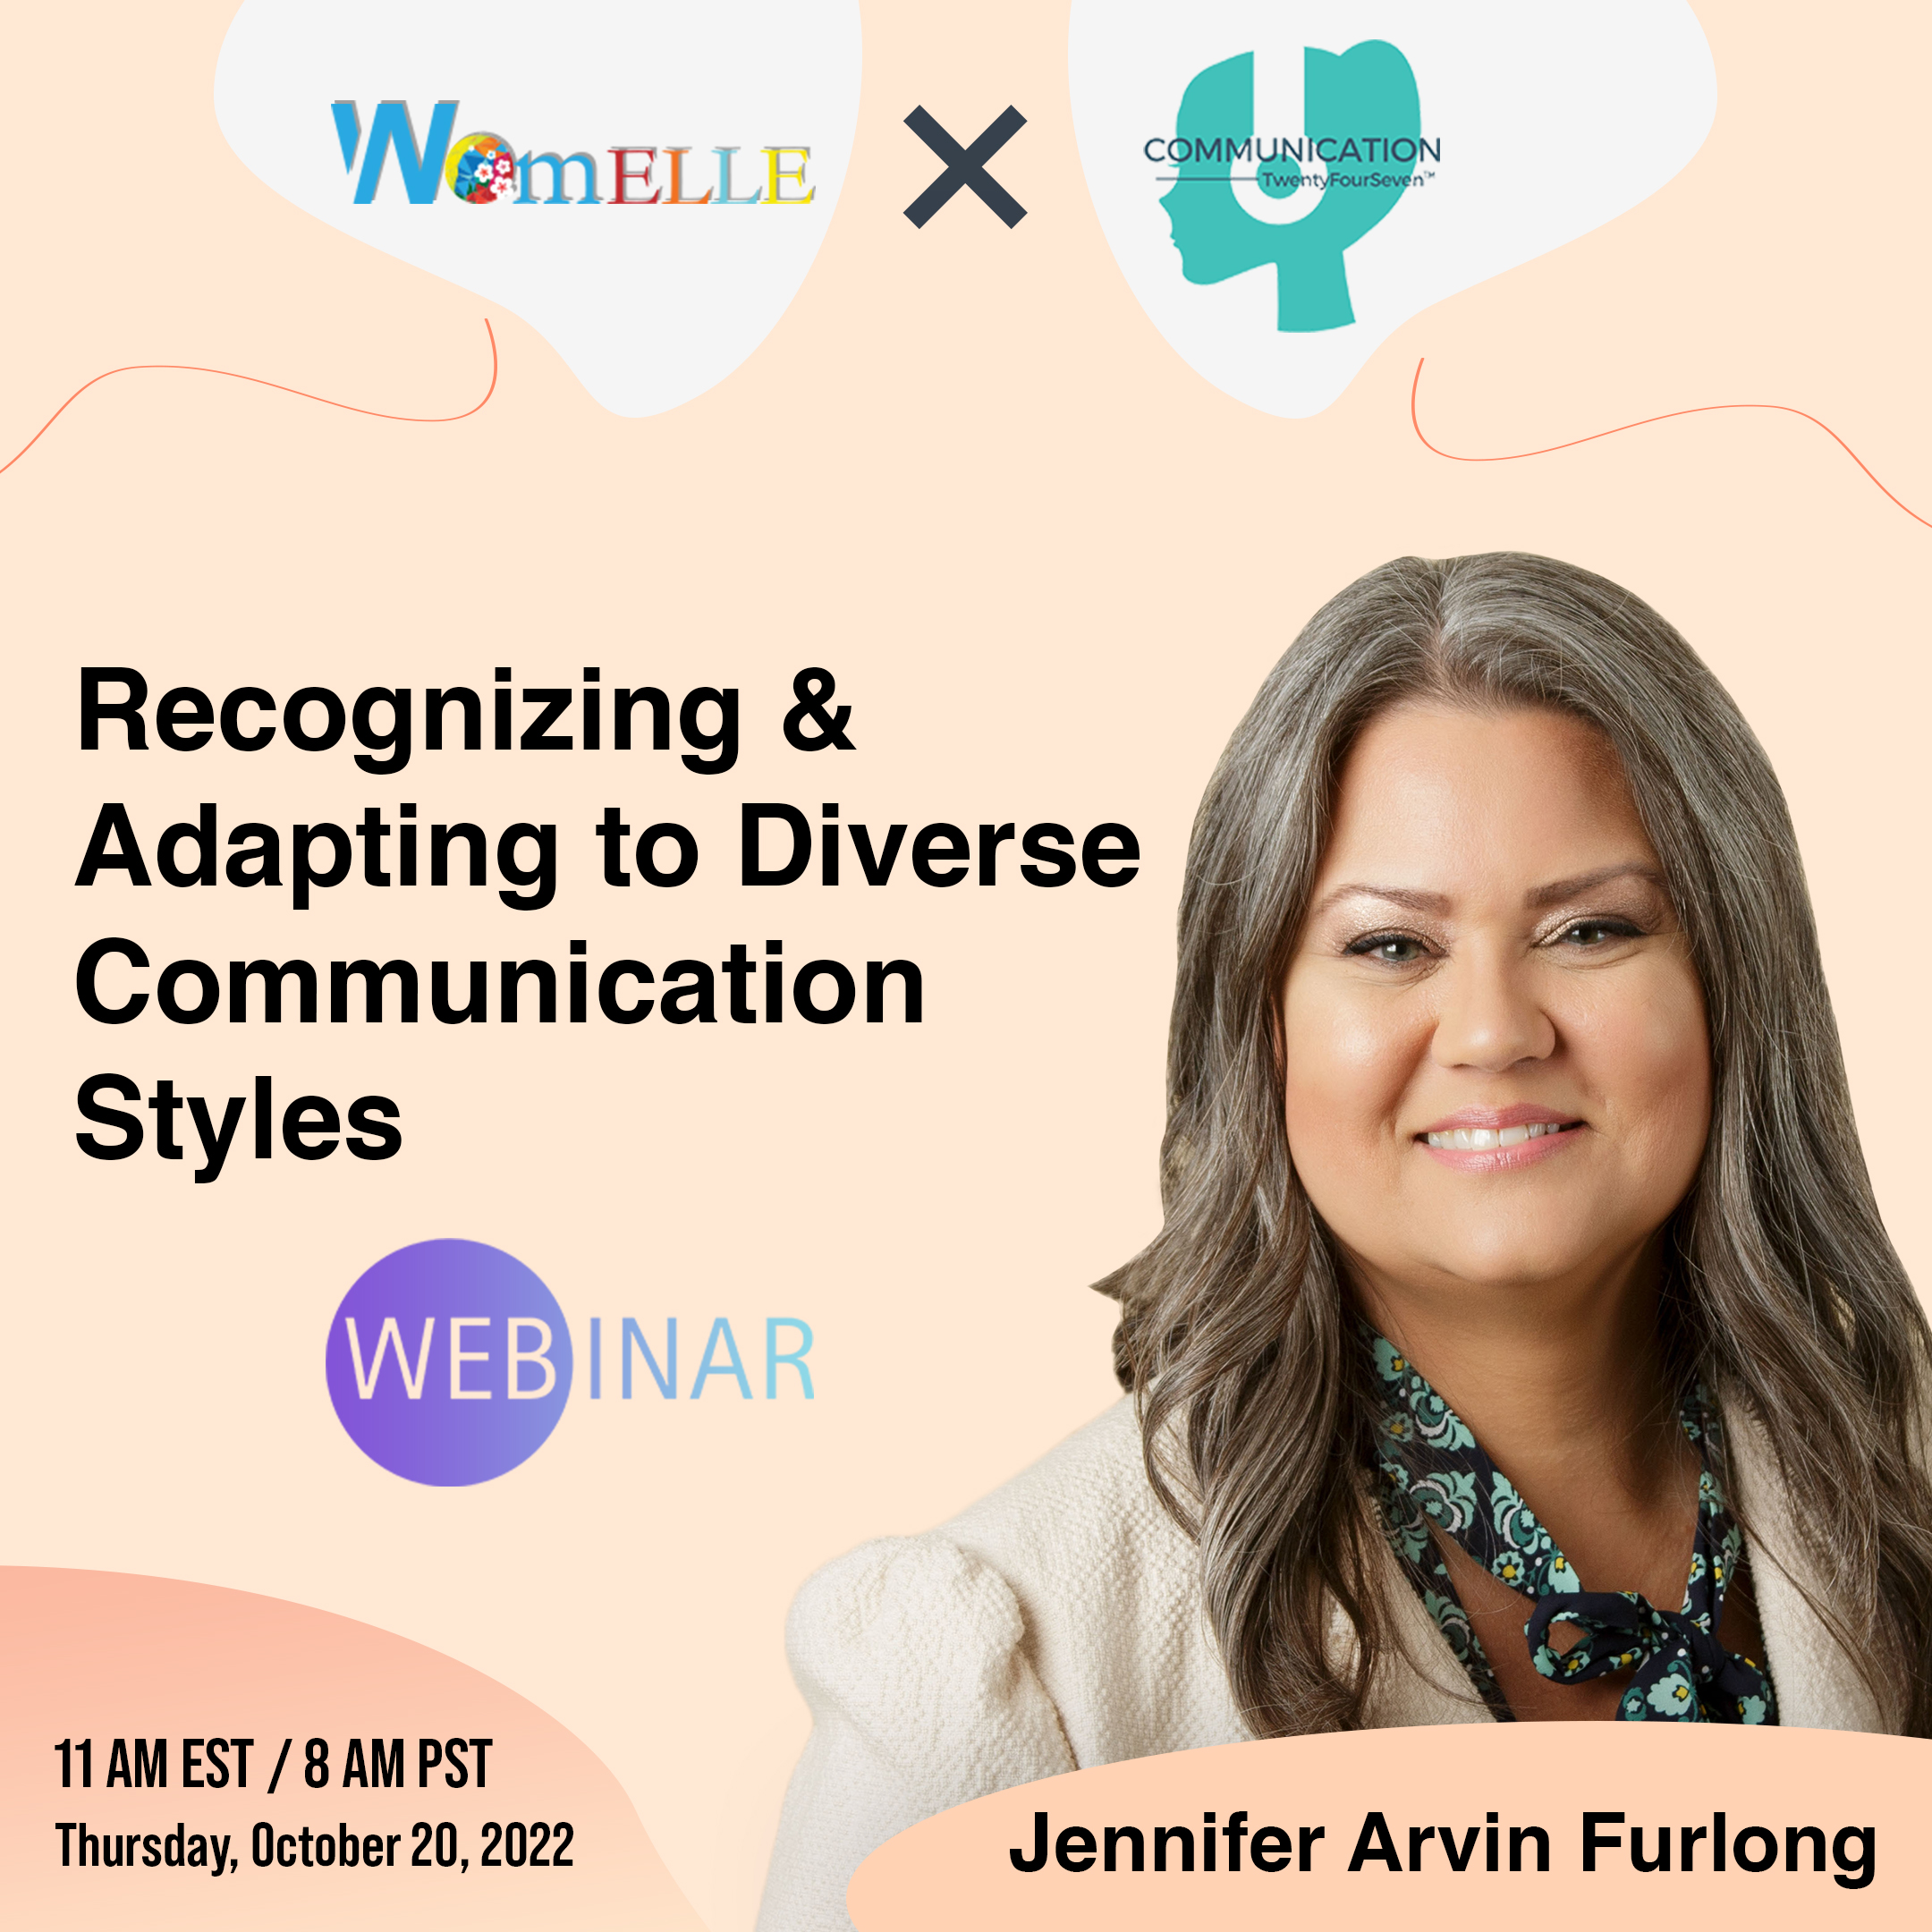 Recognizing & Adapting to Diverse Communication Styles, Online Event